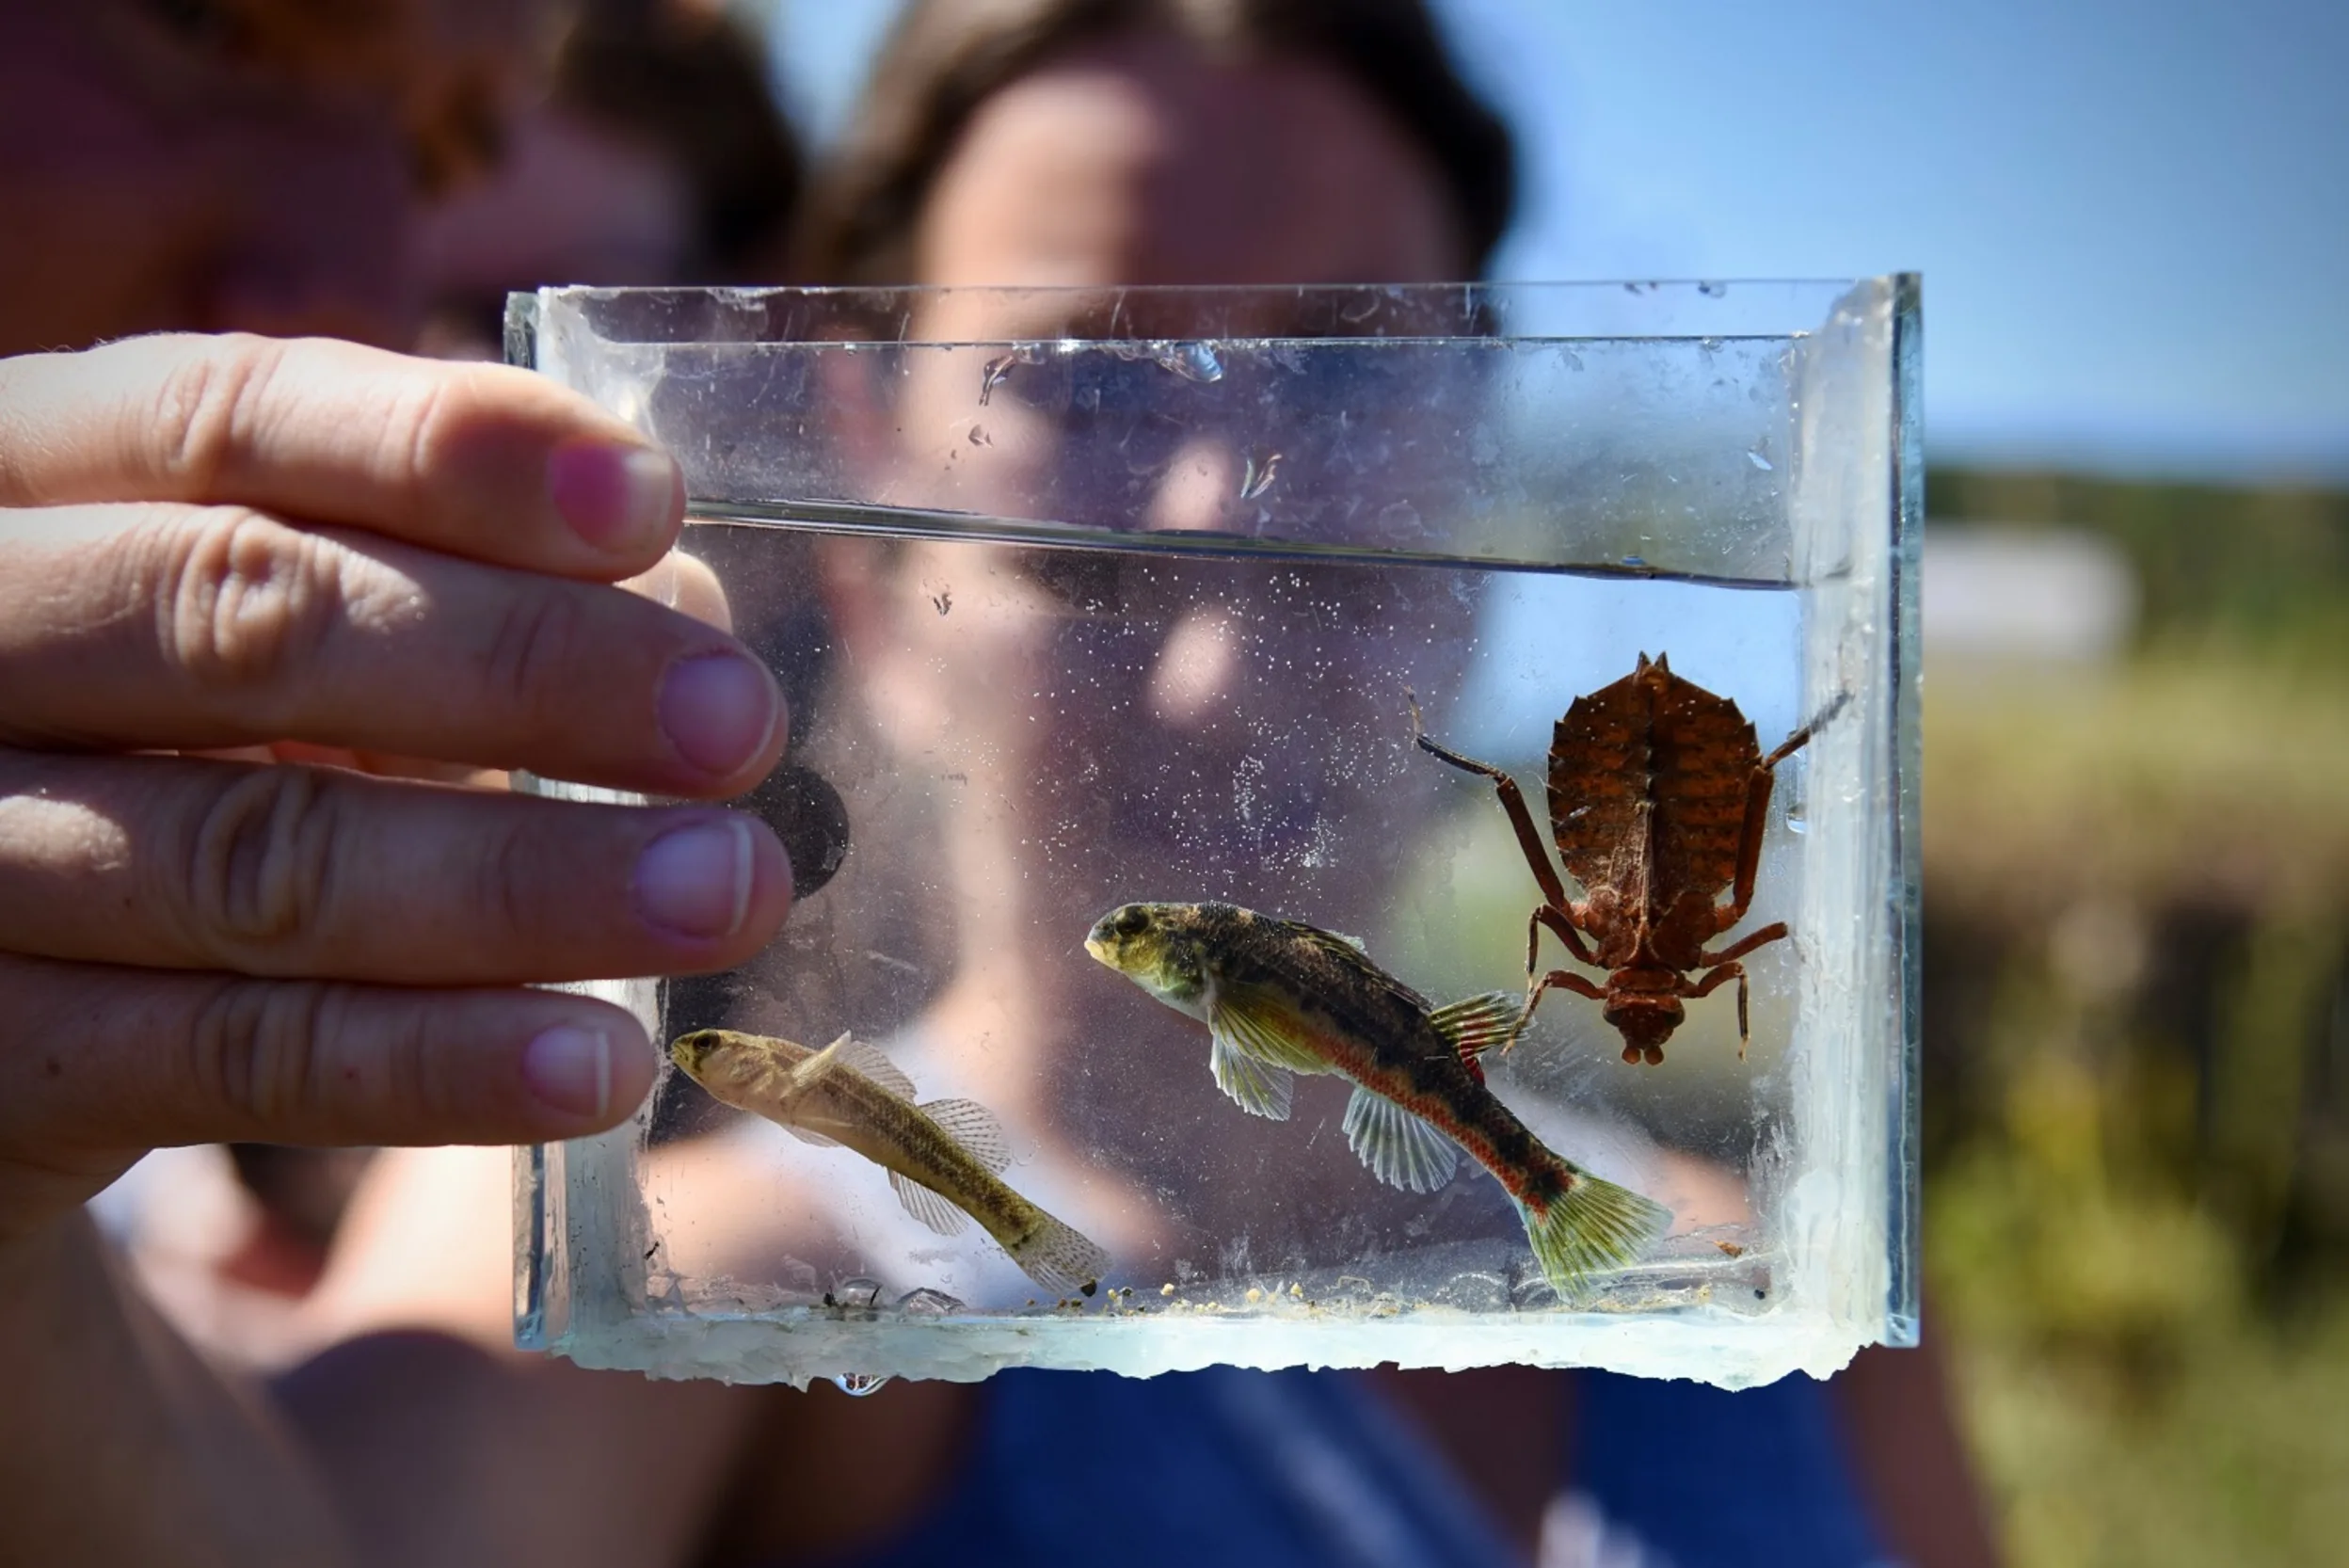 A young woman holds up a small container of water containing two tiny fish and an insect for viewing.